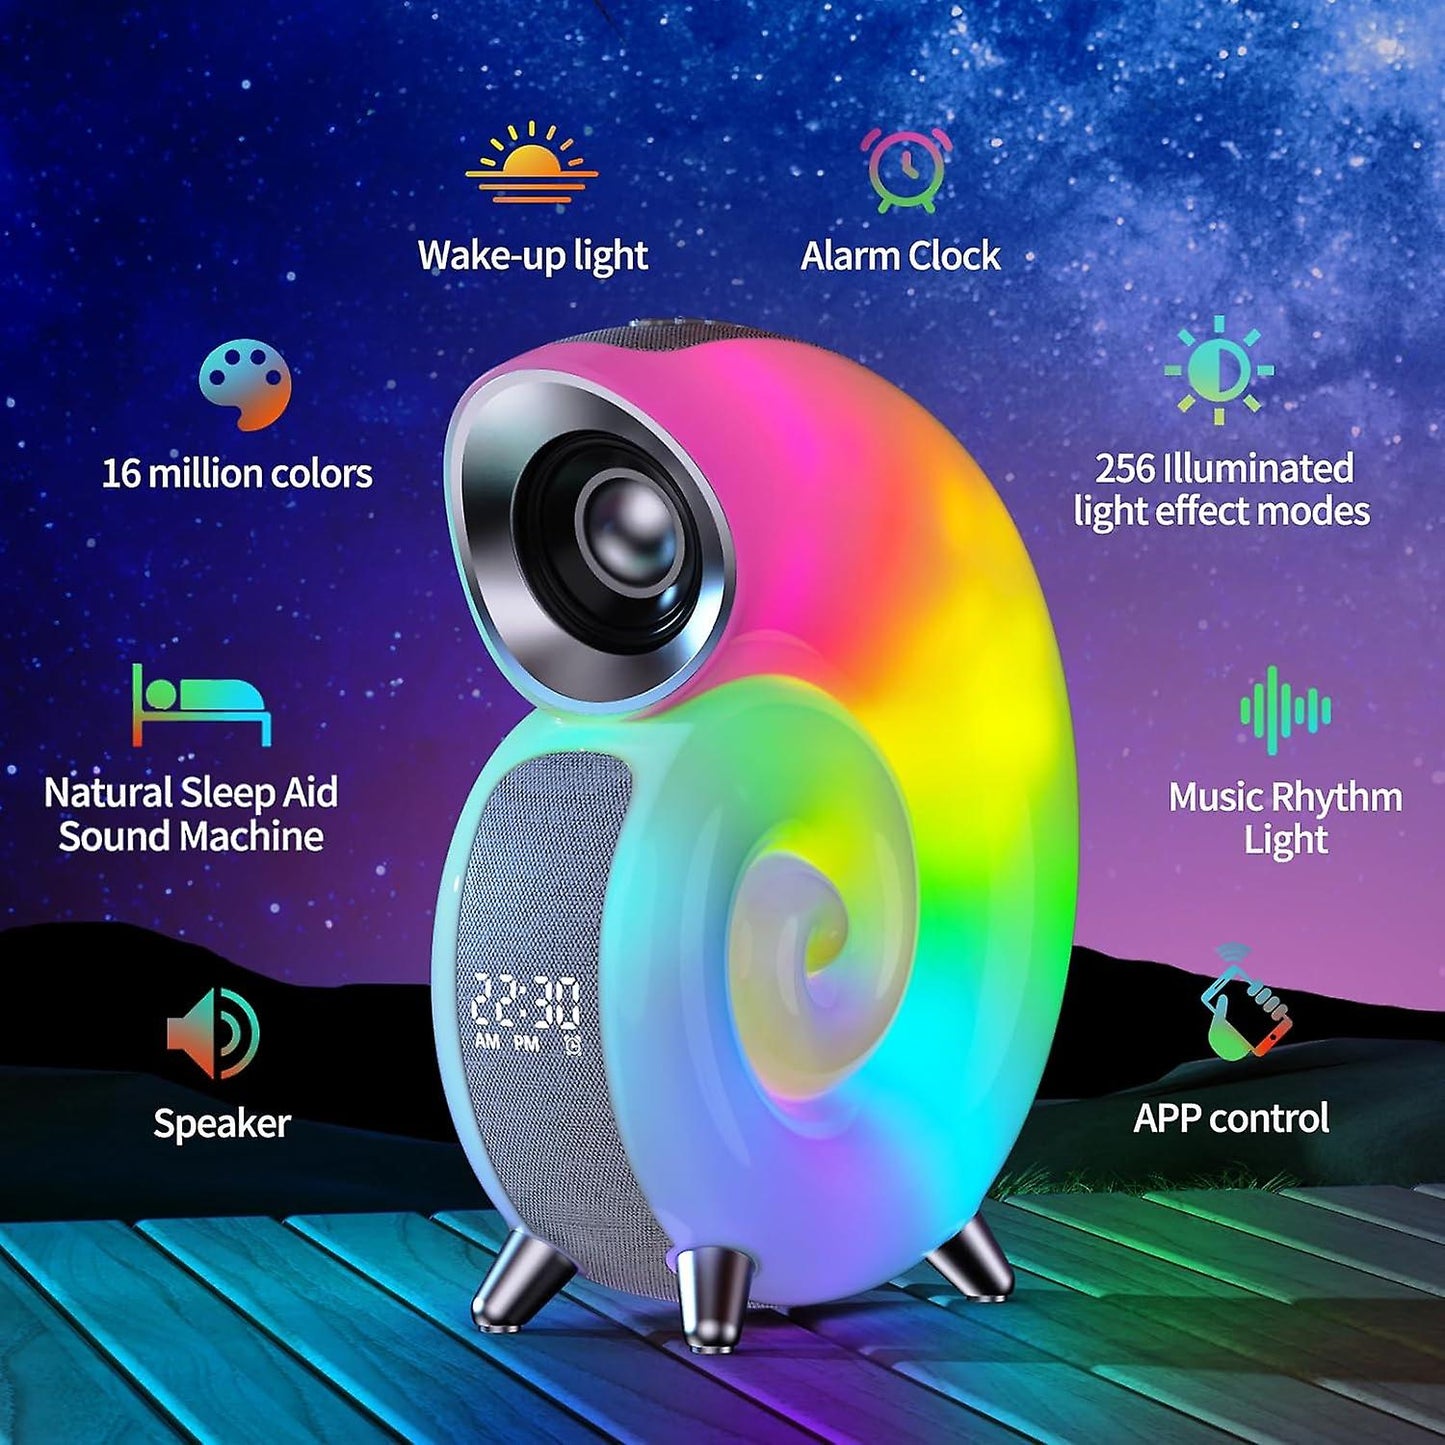 Conch Music Light Creative Smart Bluetooth Audio APP Control Wake-up Light Sleep Light Comes With White Noise